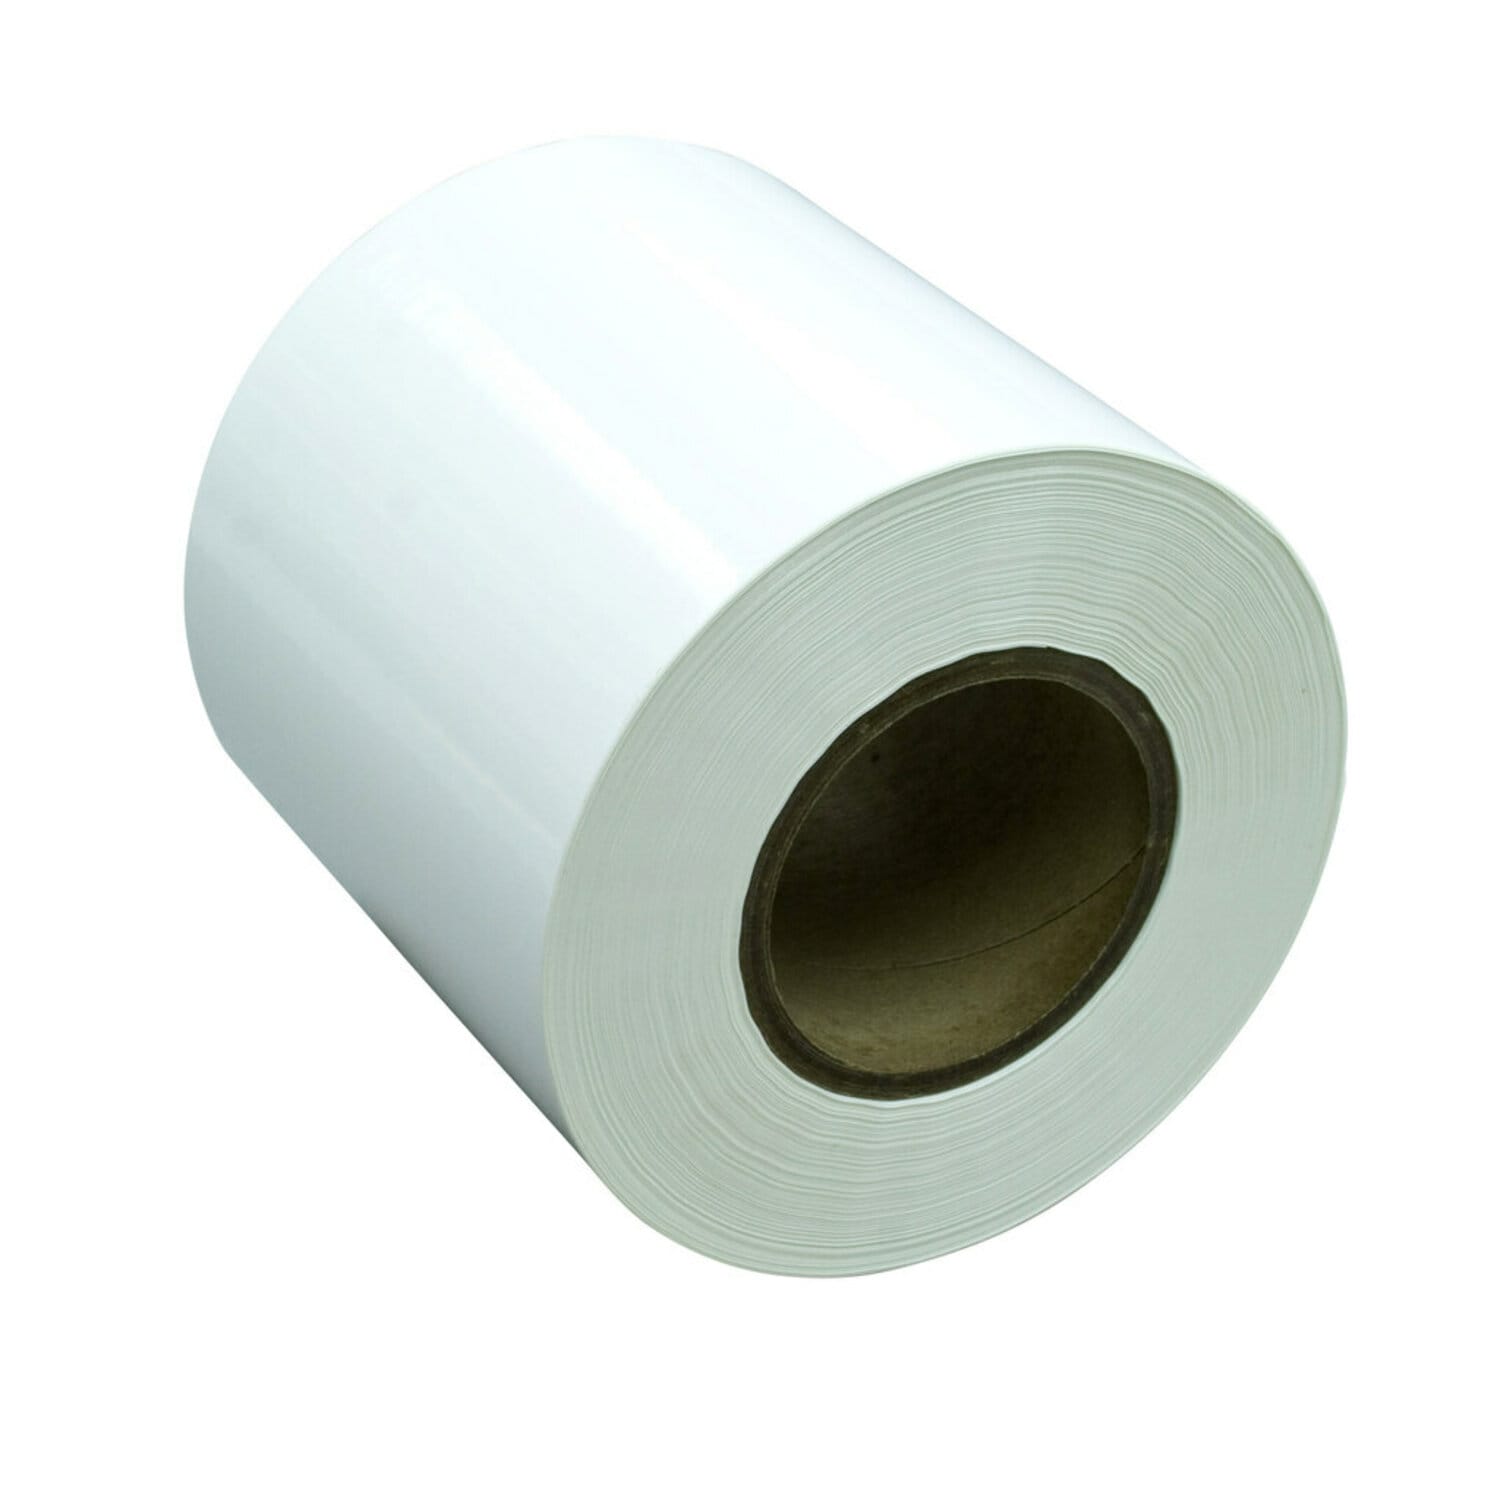 3m Scotch Dry Erase Tape White Removable 5yd X 1.88 1 Roll for sale online